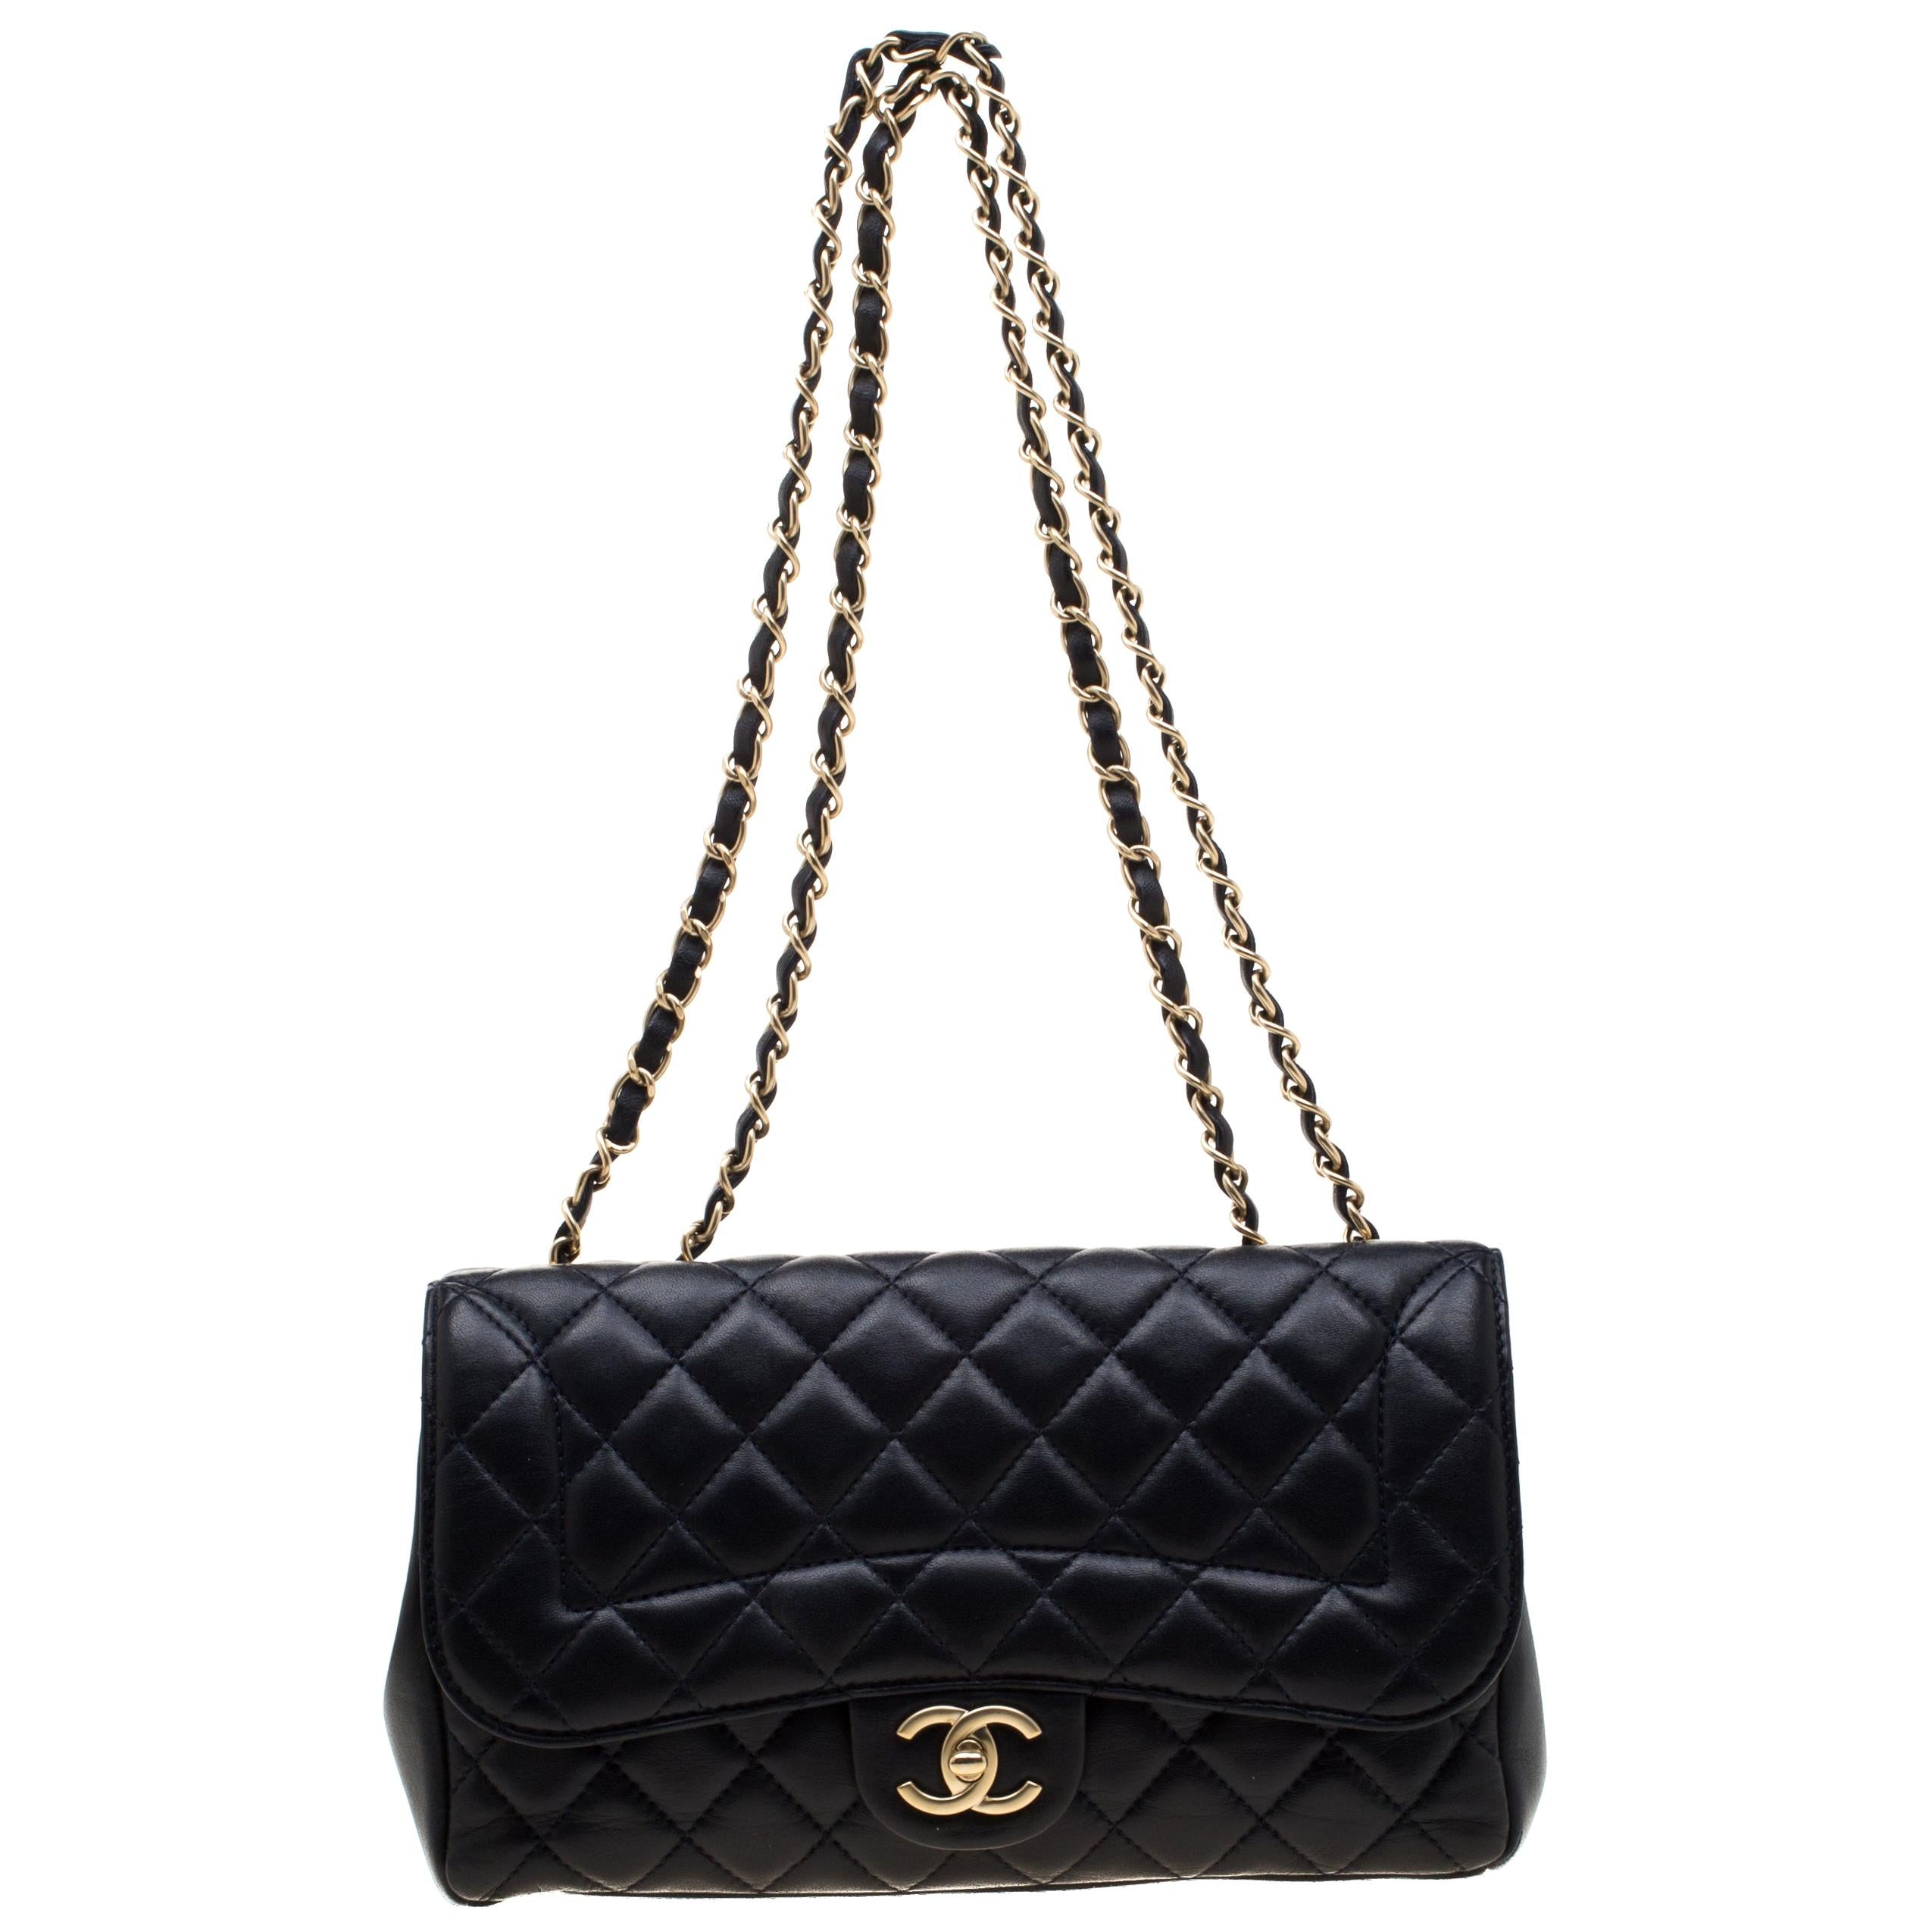 Chanel Navy Blue Quilted Leather Mademoiselle Chic Flap Shoulder Bag